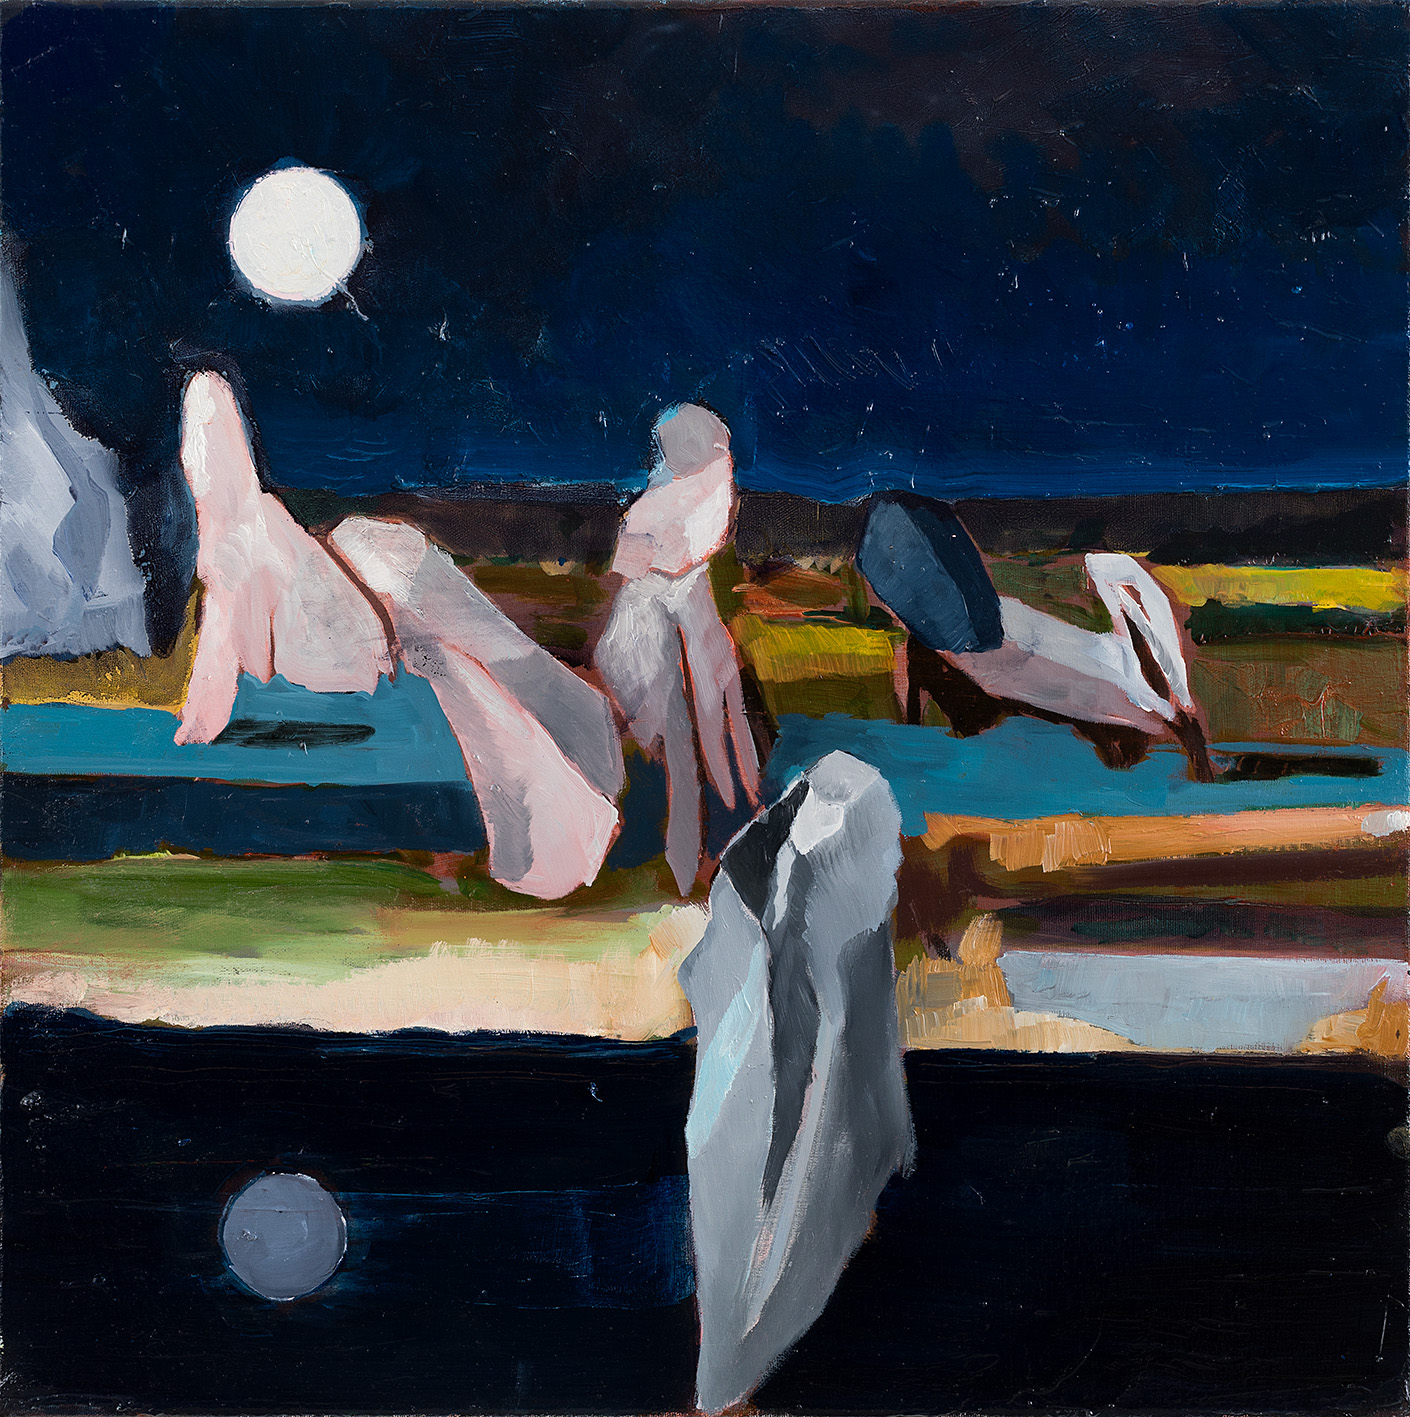 "The Moon is a Mirror"
2022,
Oil on canvas,
70x70 cm